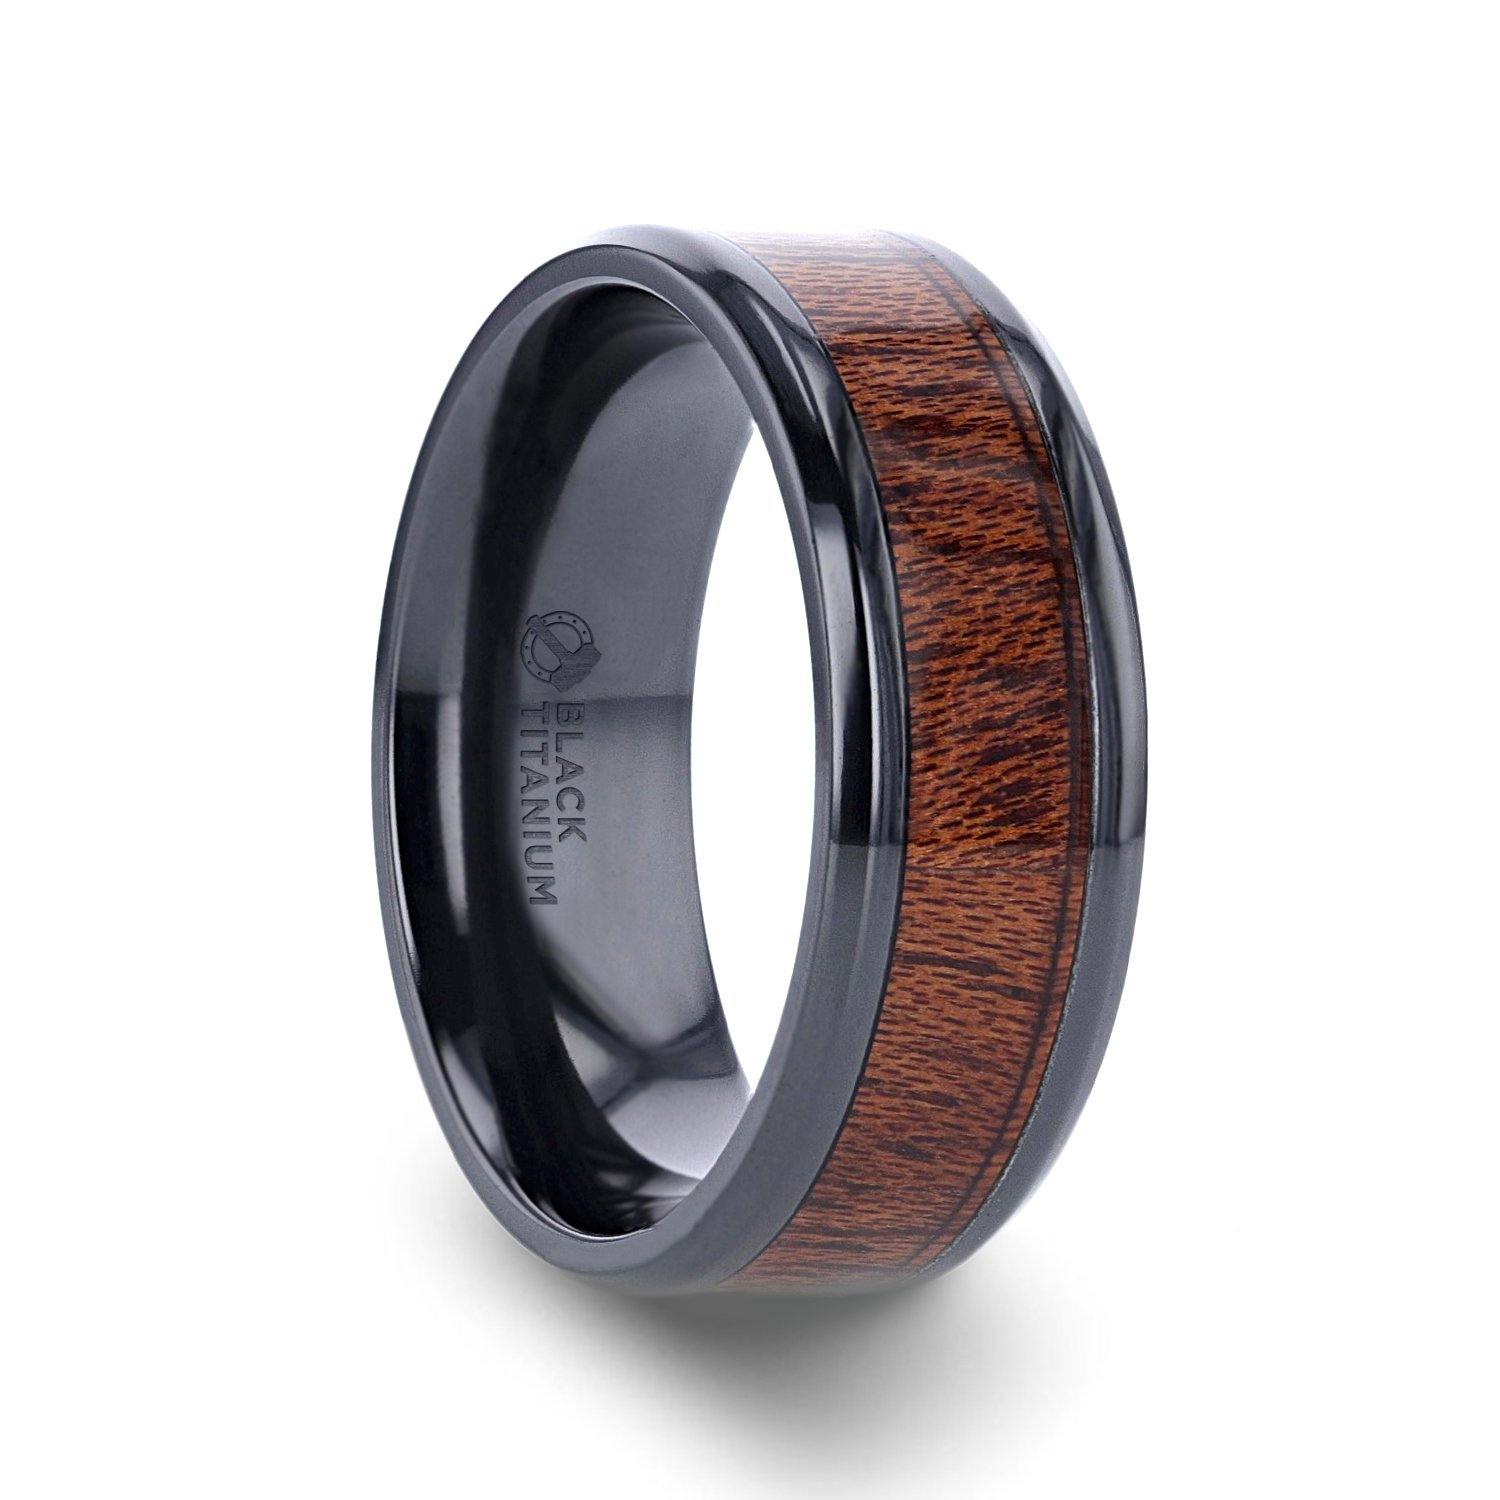 DOMINICA - Black Titanium Band with Polished Bevels and Exotic Mahogany Hard Wood Inlay - 8 mm - The Rutile Ltd